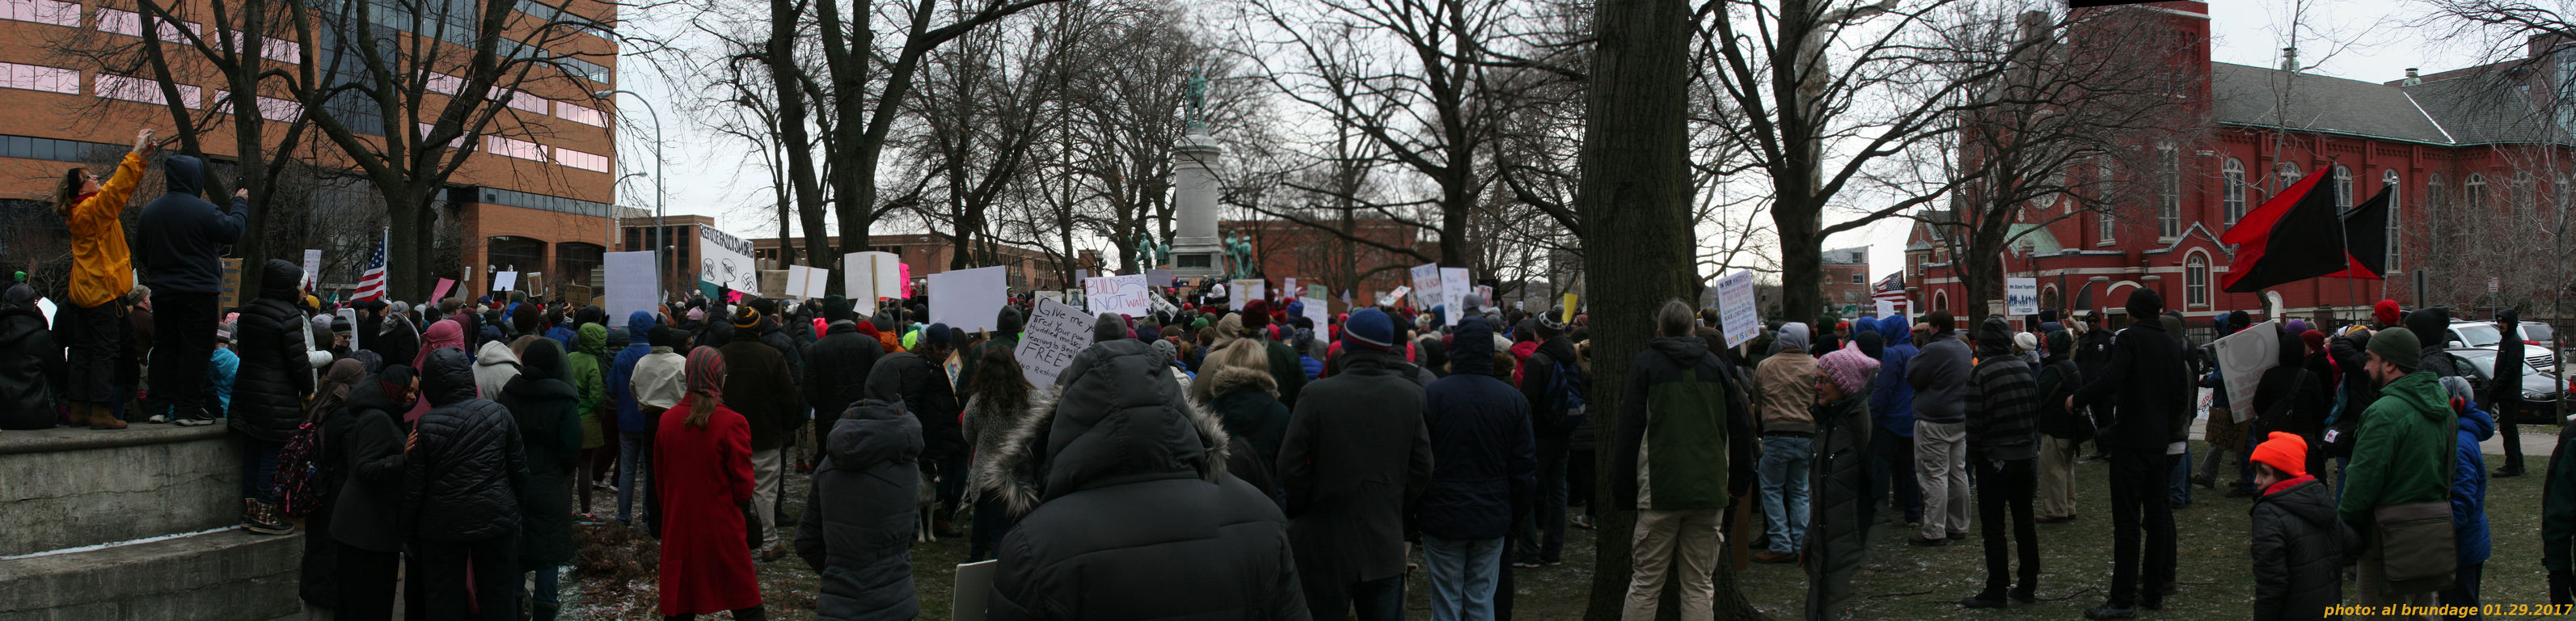 protesters fill park